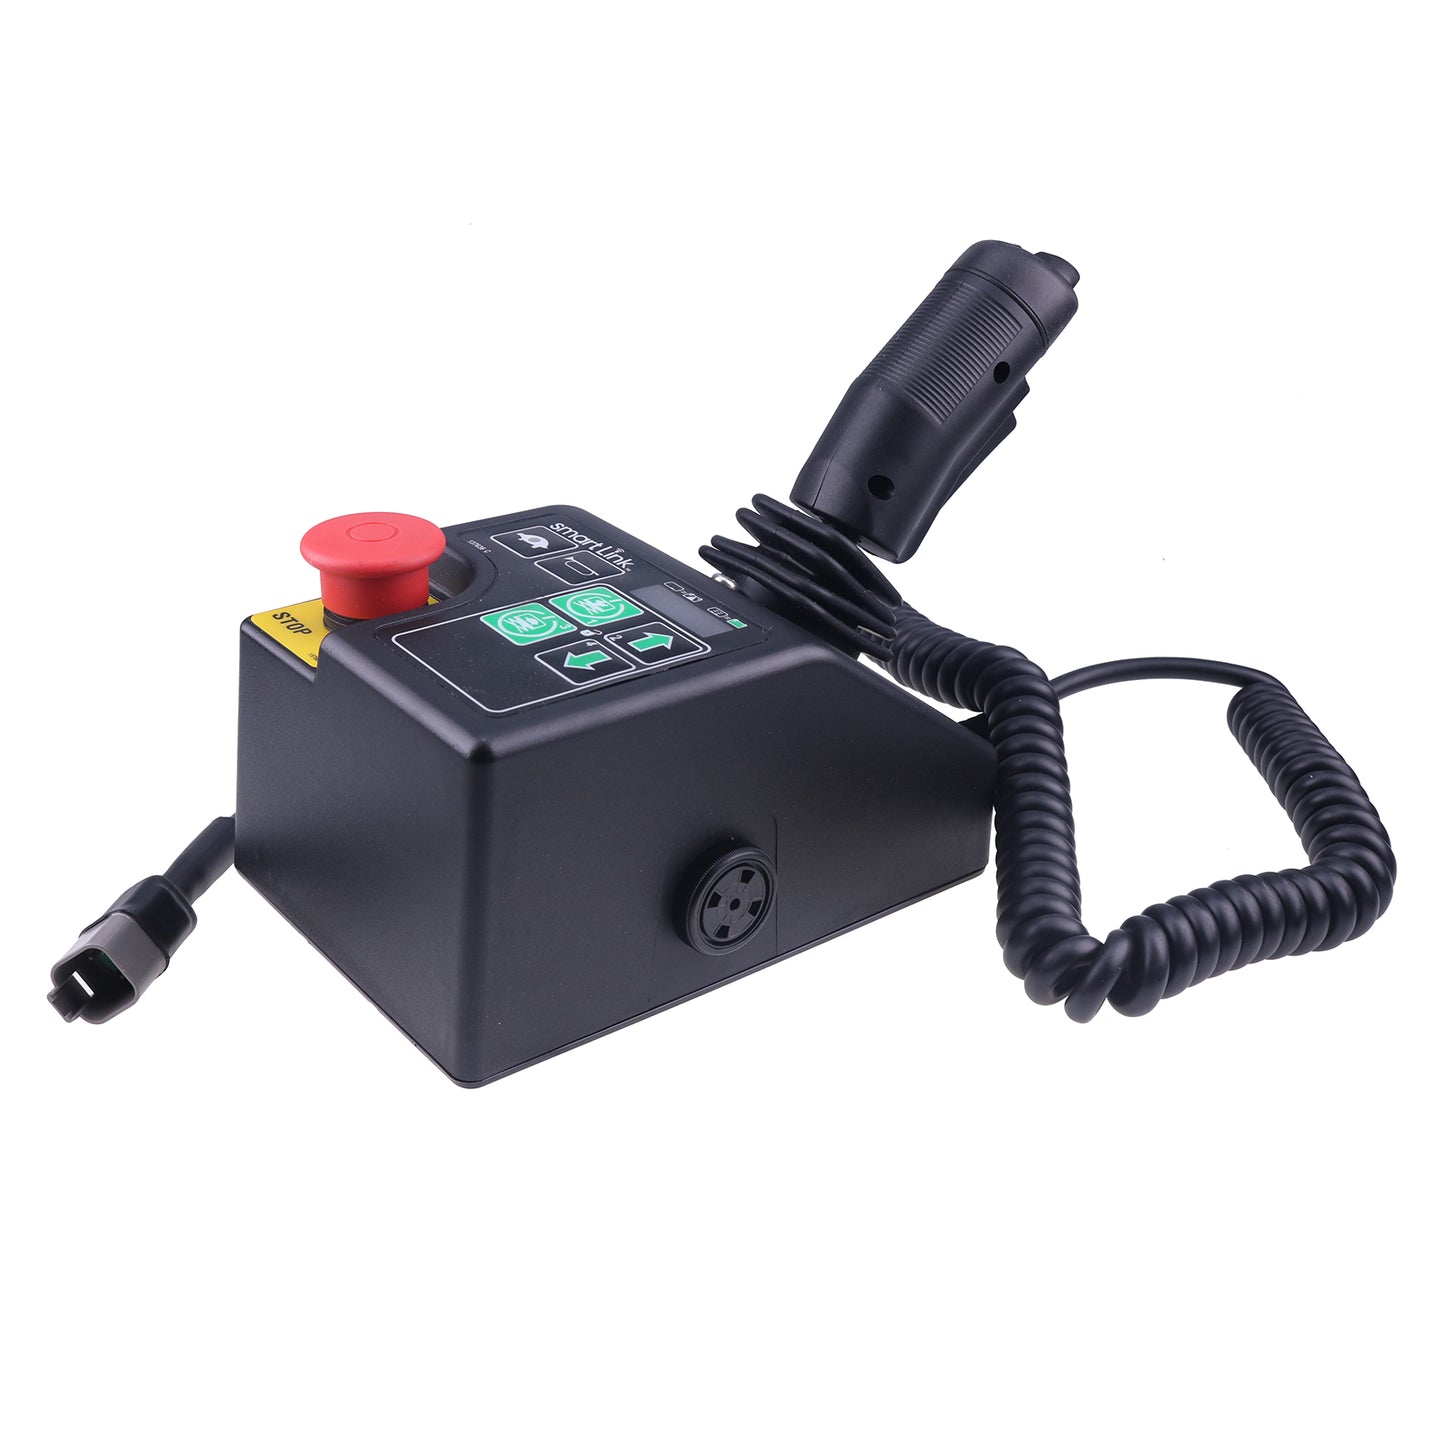 New 137633 137633GT Control Box Compatible with Genie Gen 6 GS-1530 GS-1532 GS-1930 GS-1932 GS-2032 GS-2046 GS-2632 GR-12 GR-15 GR-20 GS-1530 GS-1532 GS-1930